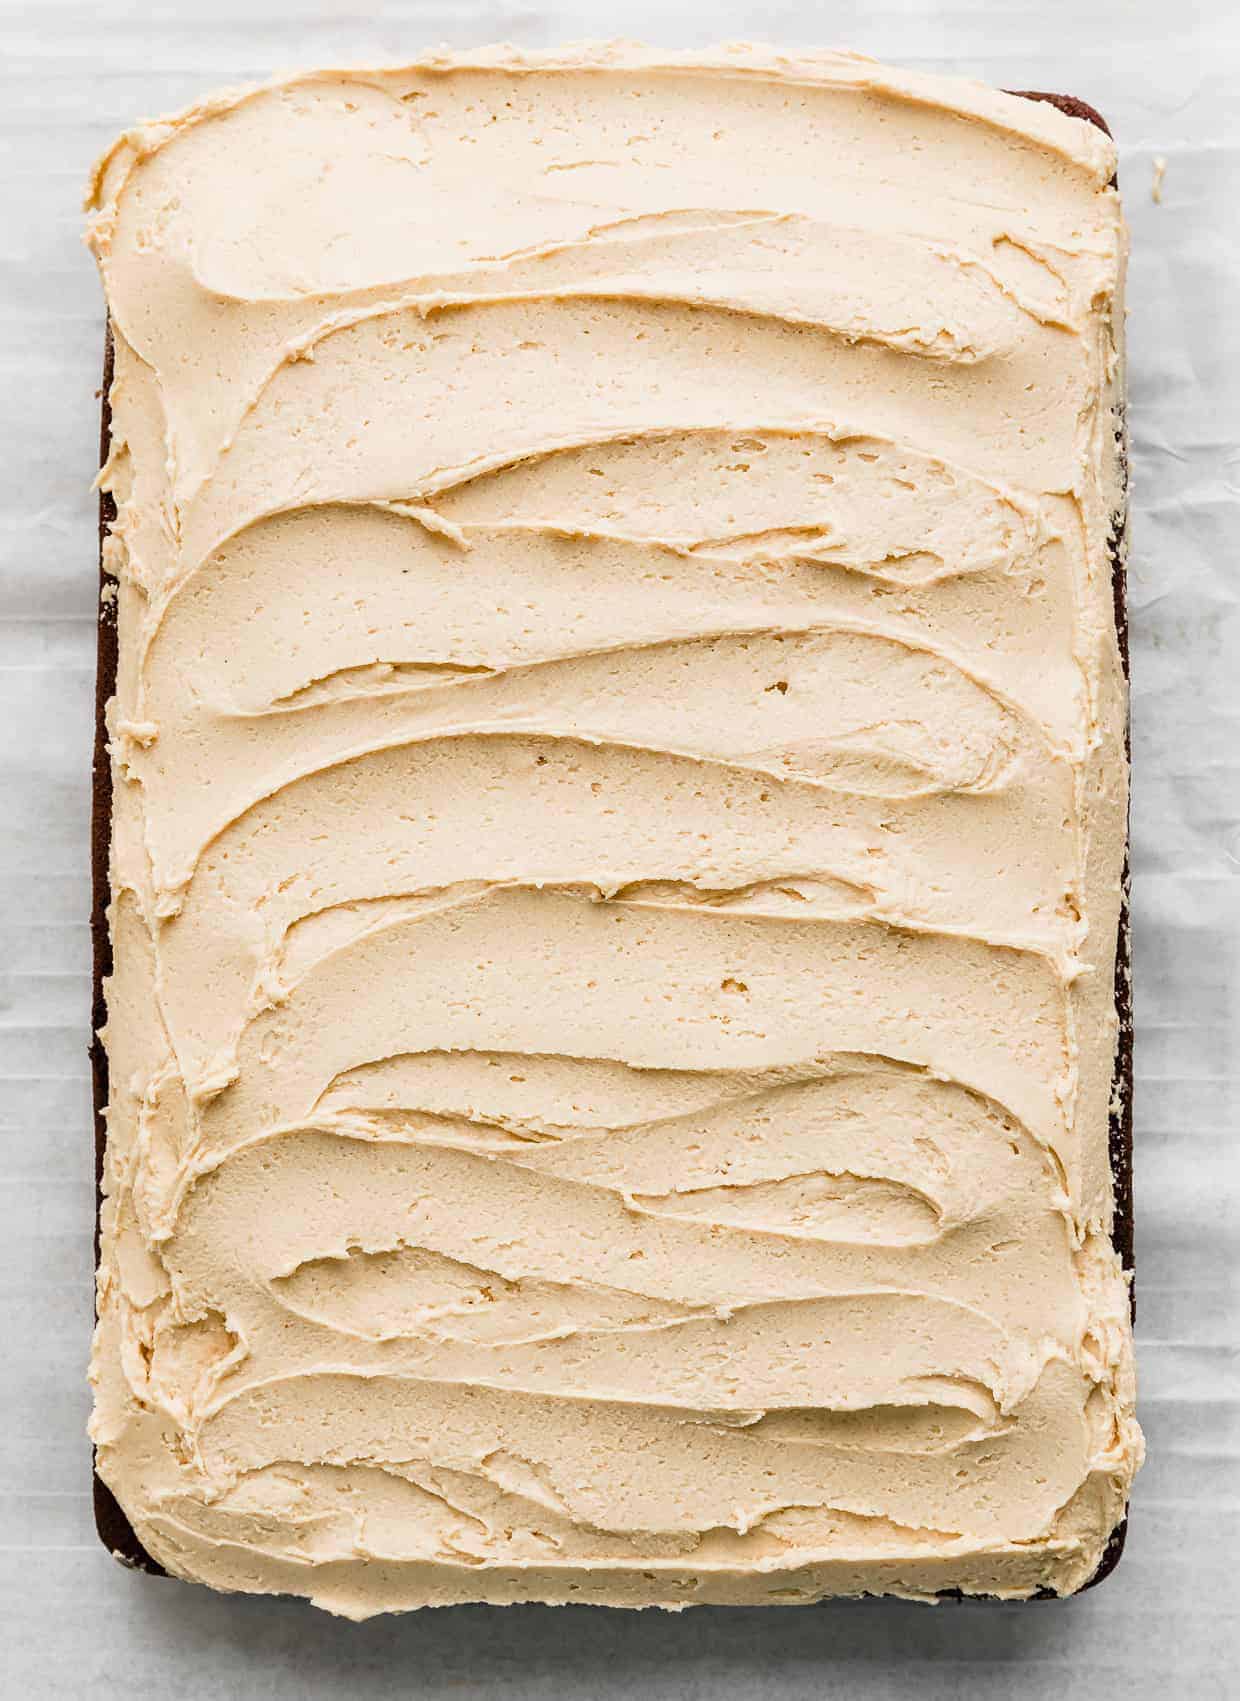 A light golden colored peanut butter frosting spread across a sheet chocolate cake.